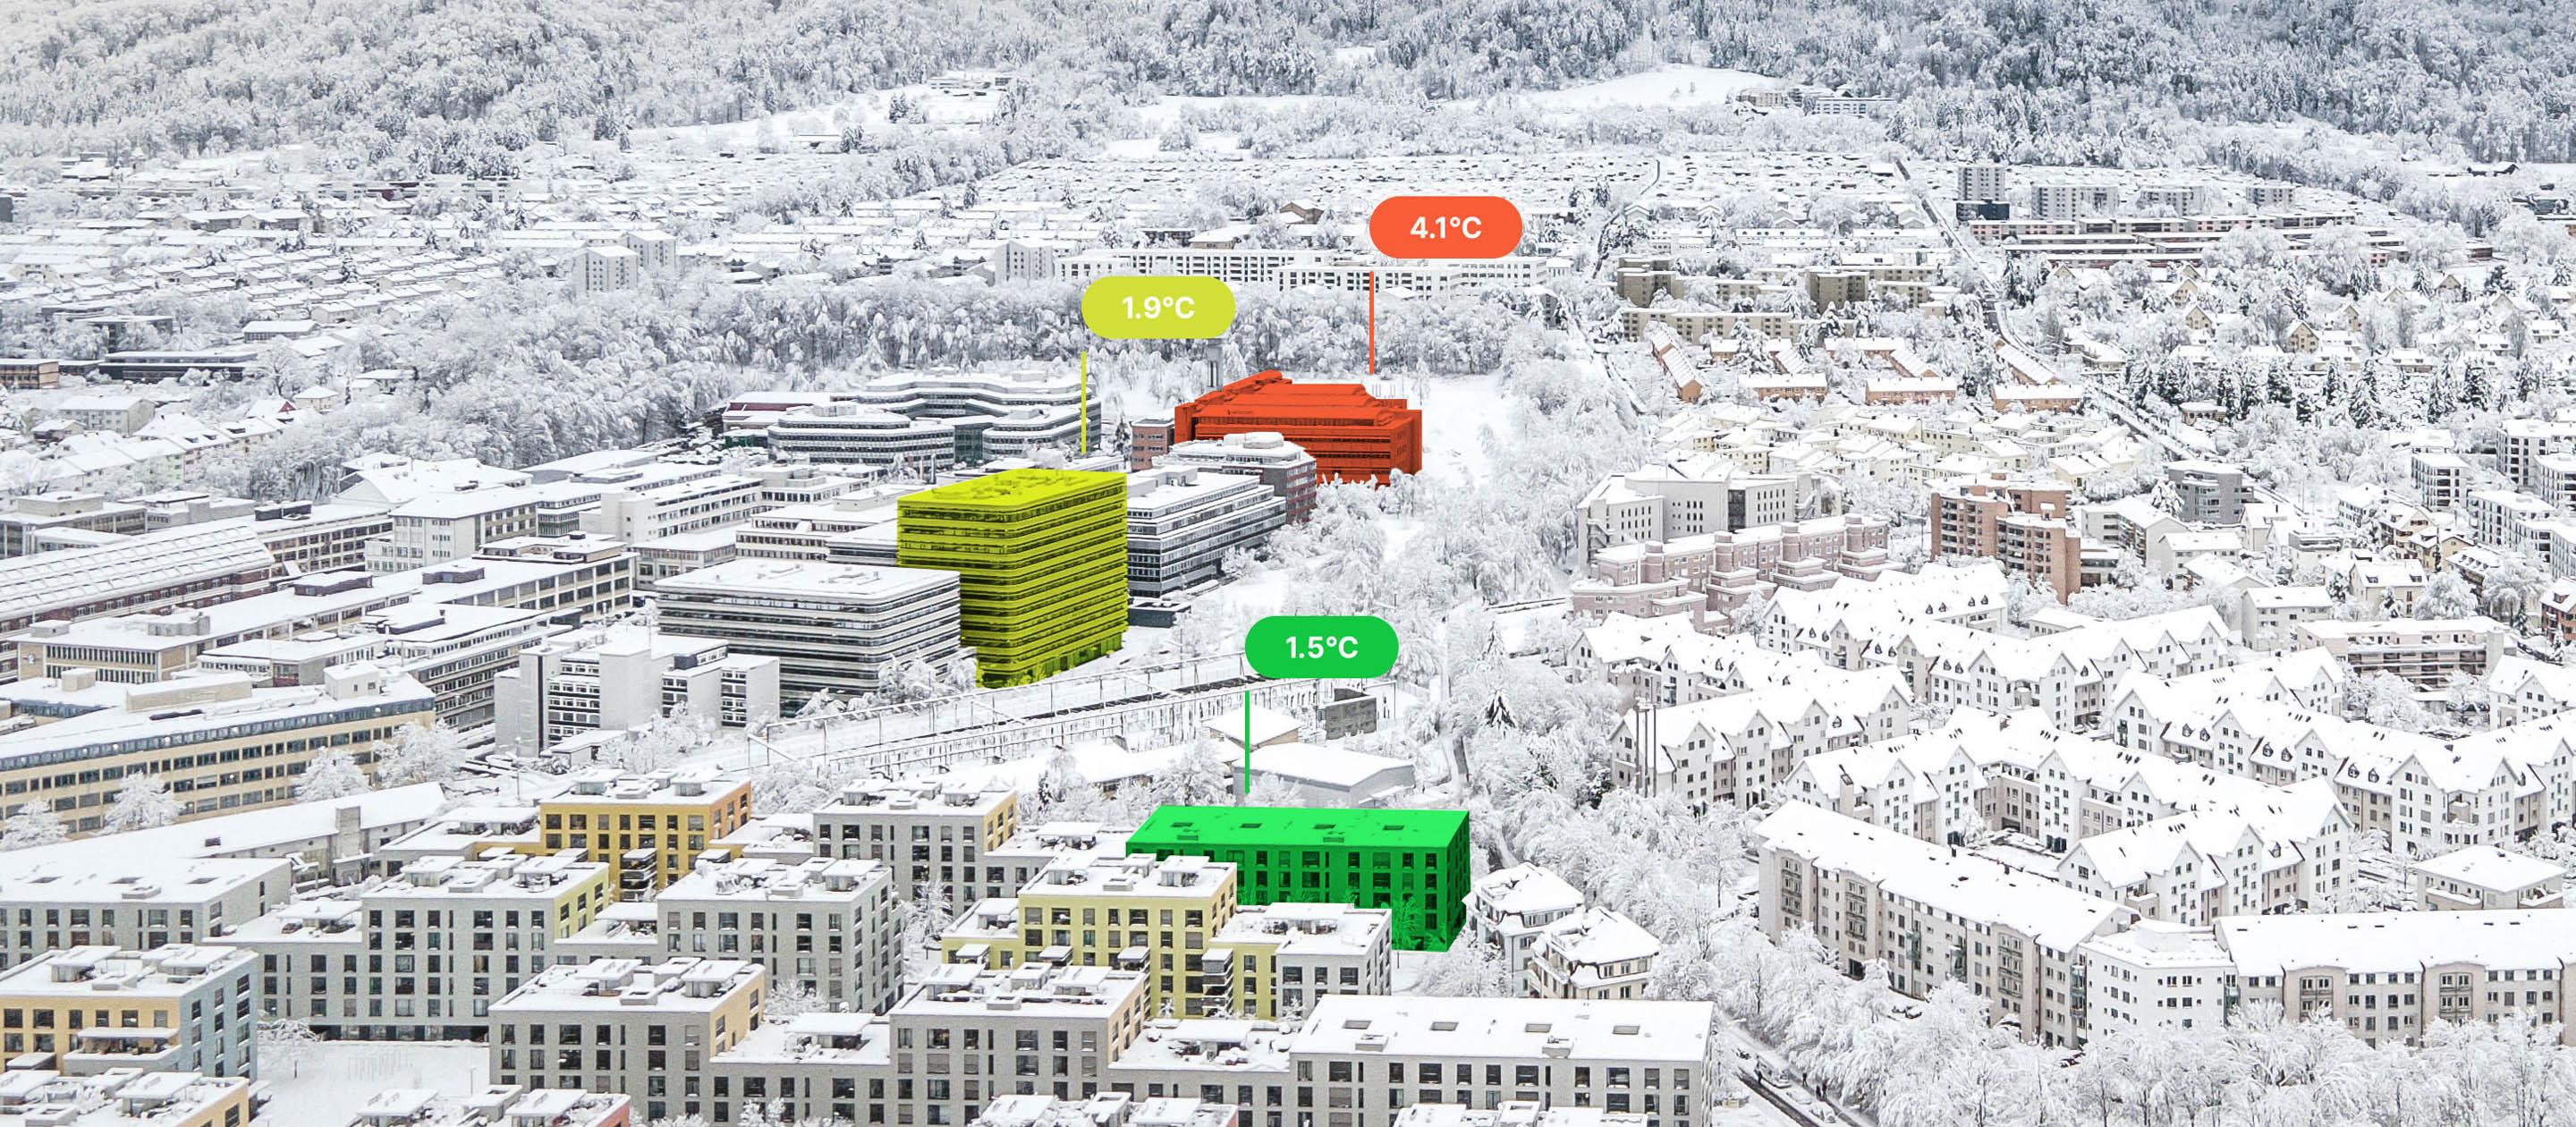 View of snow-covered buildings from above, three of them are coloured. One in red with the label 4.1°C, one in yellow with 1.9°C and a third in green with 1.5°C.